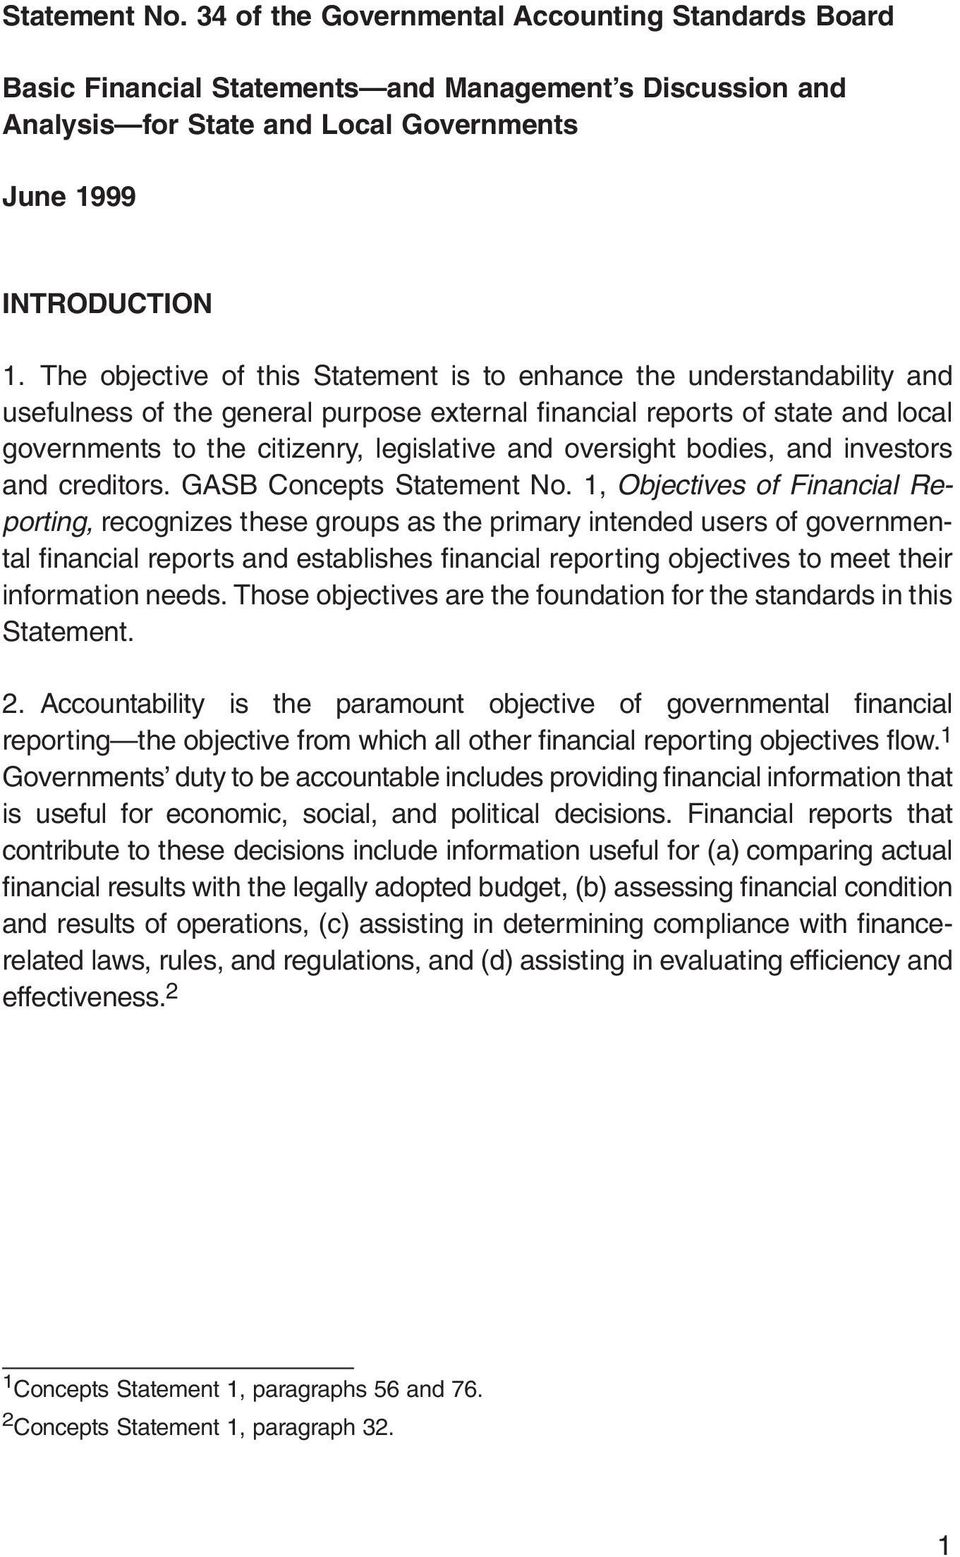 oversight bodies, and investors and creditors. GASB Concepts Statement No.